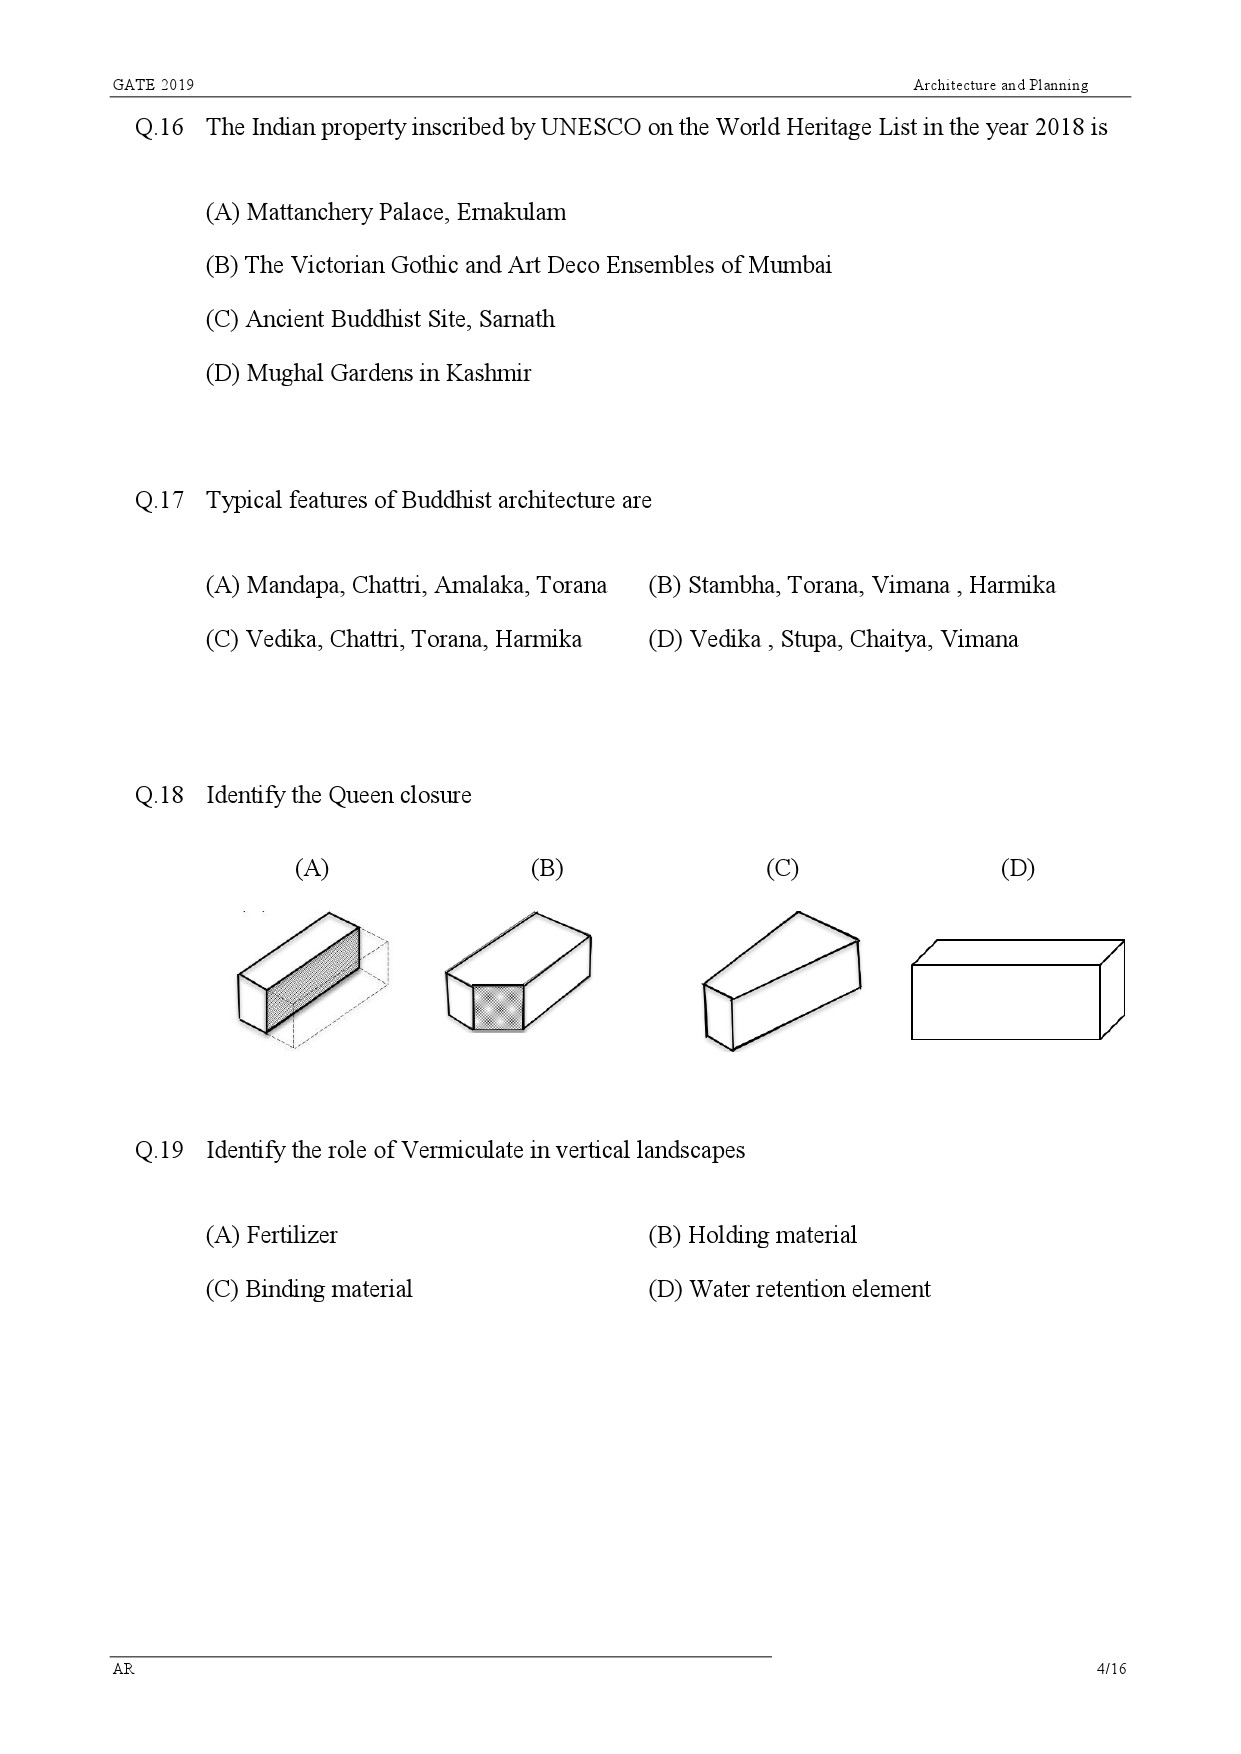 GATE Exam Question Paper 2019 Architecture and Planning 7